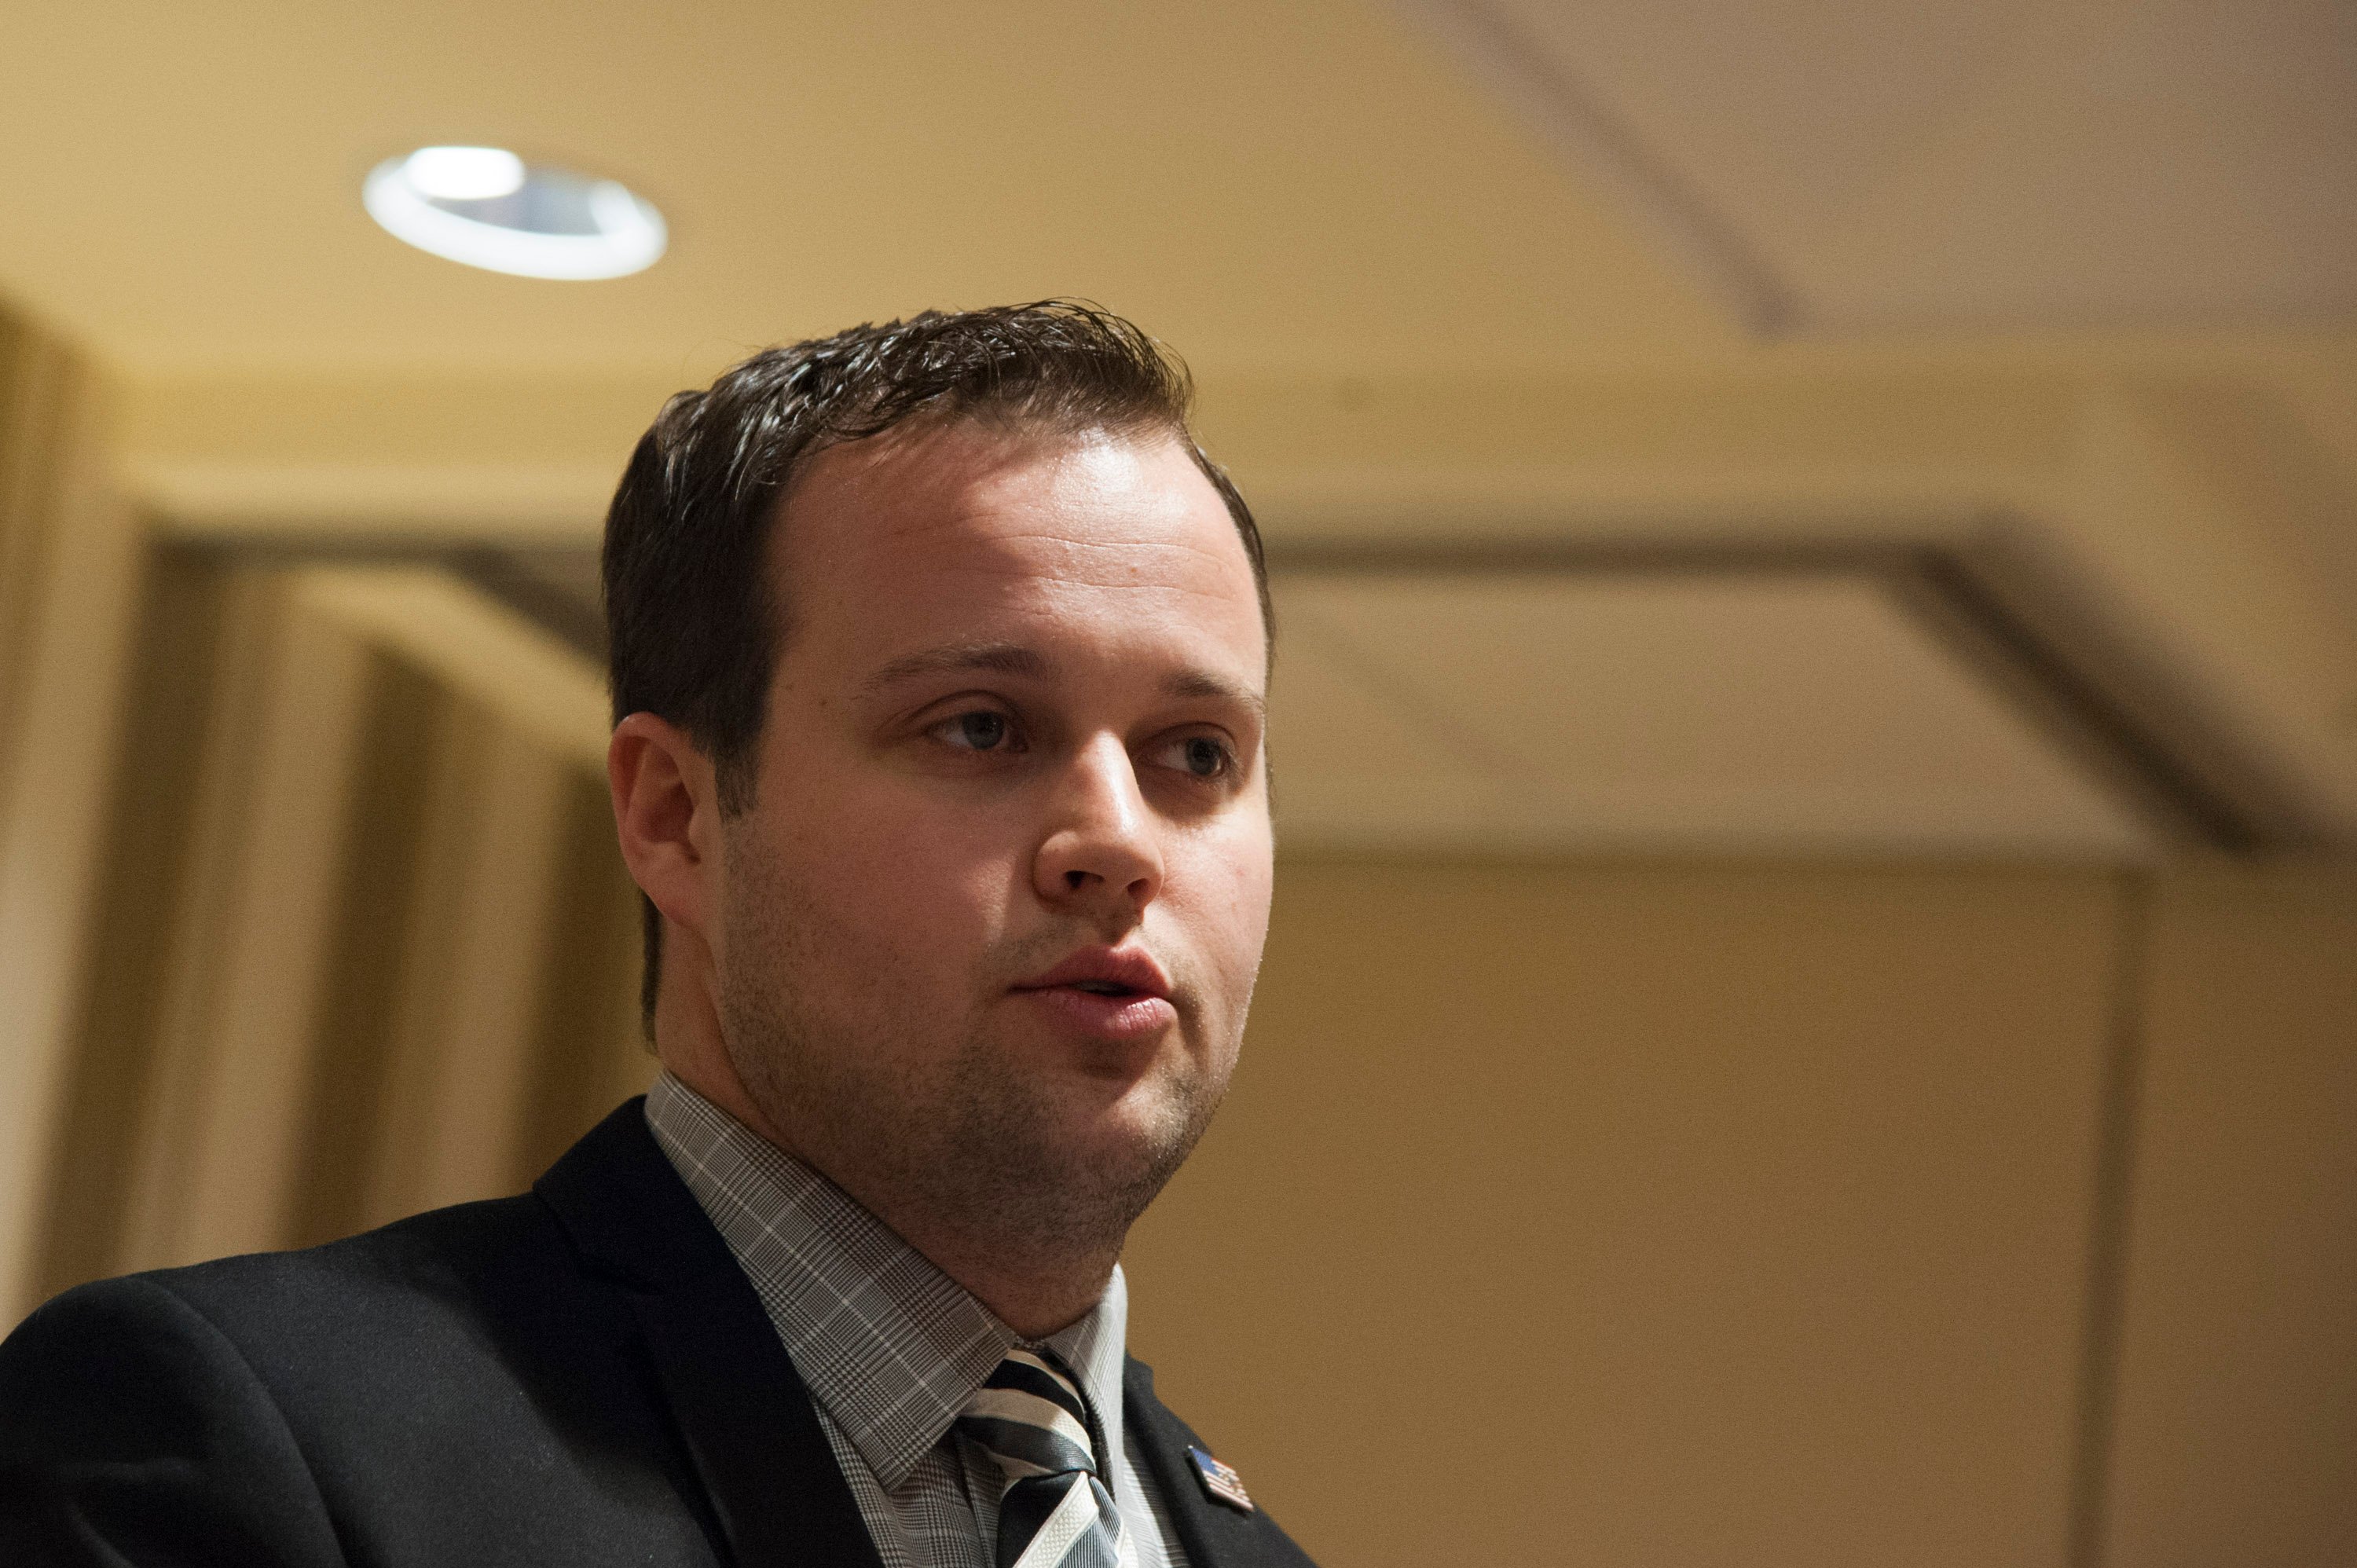 A close-up of Josh Duggar speaking. Josh Duggar news continues to make headlines due to his April 2021 arrest.